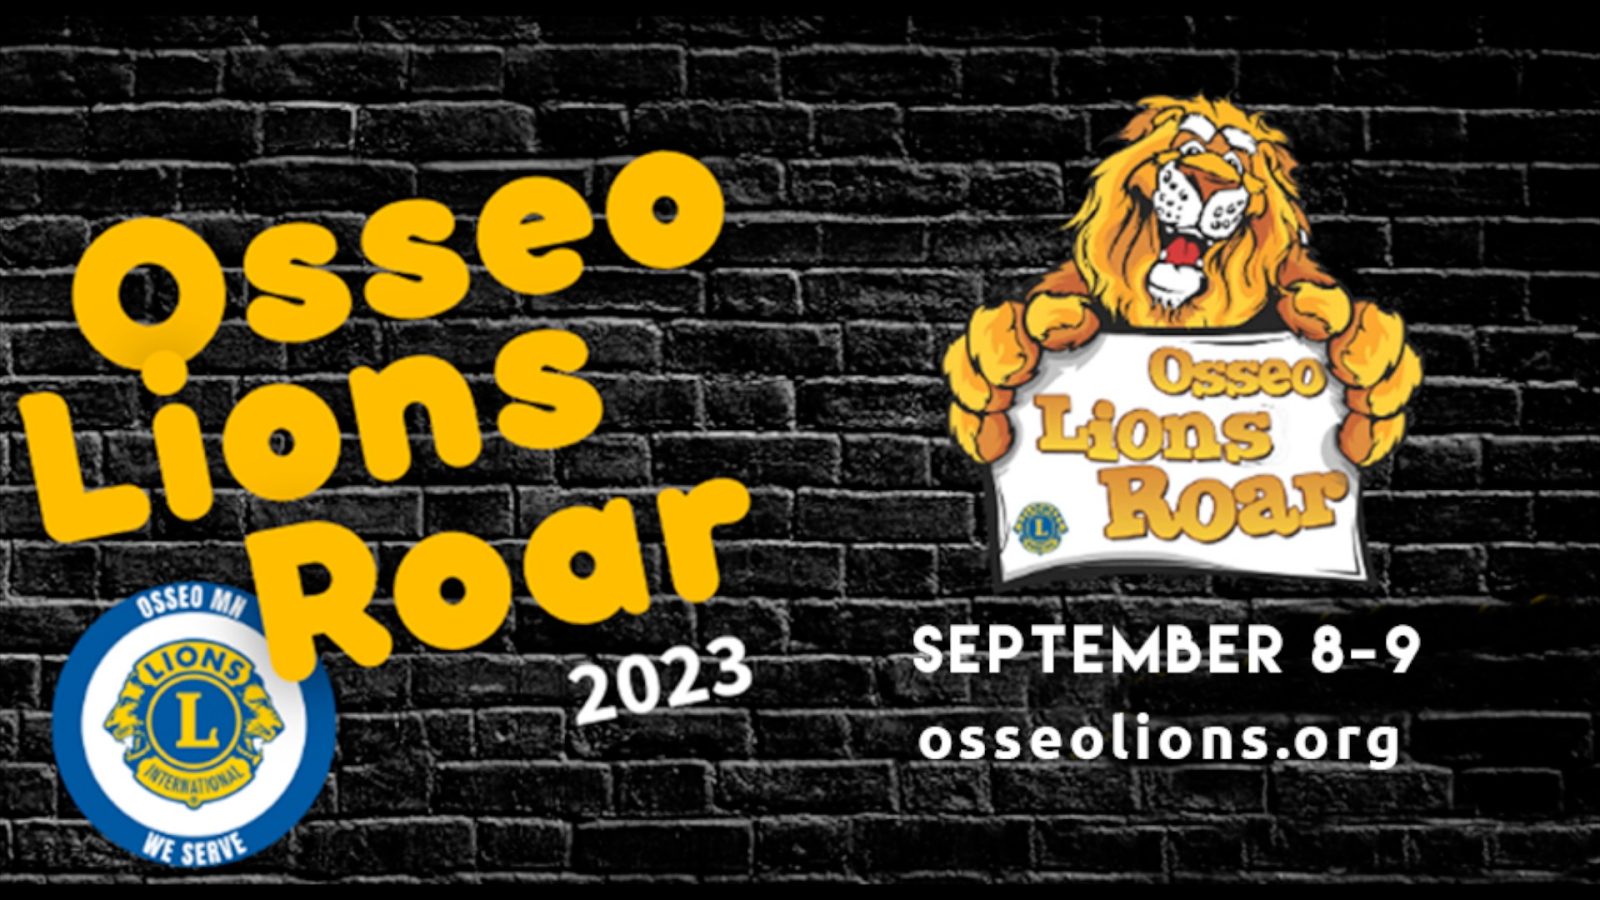 Osseo Lions Roar logo and dates